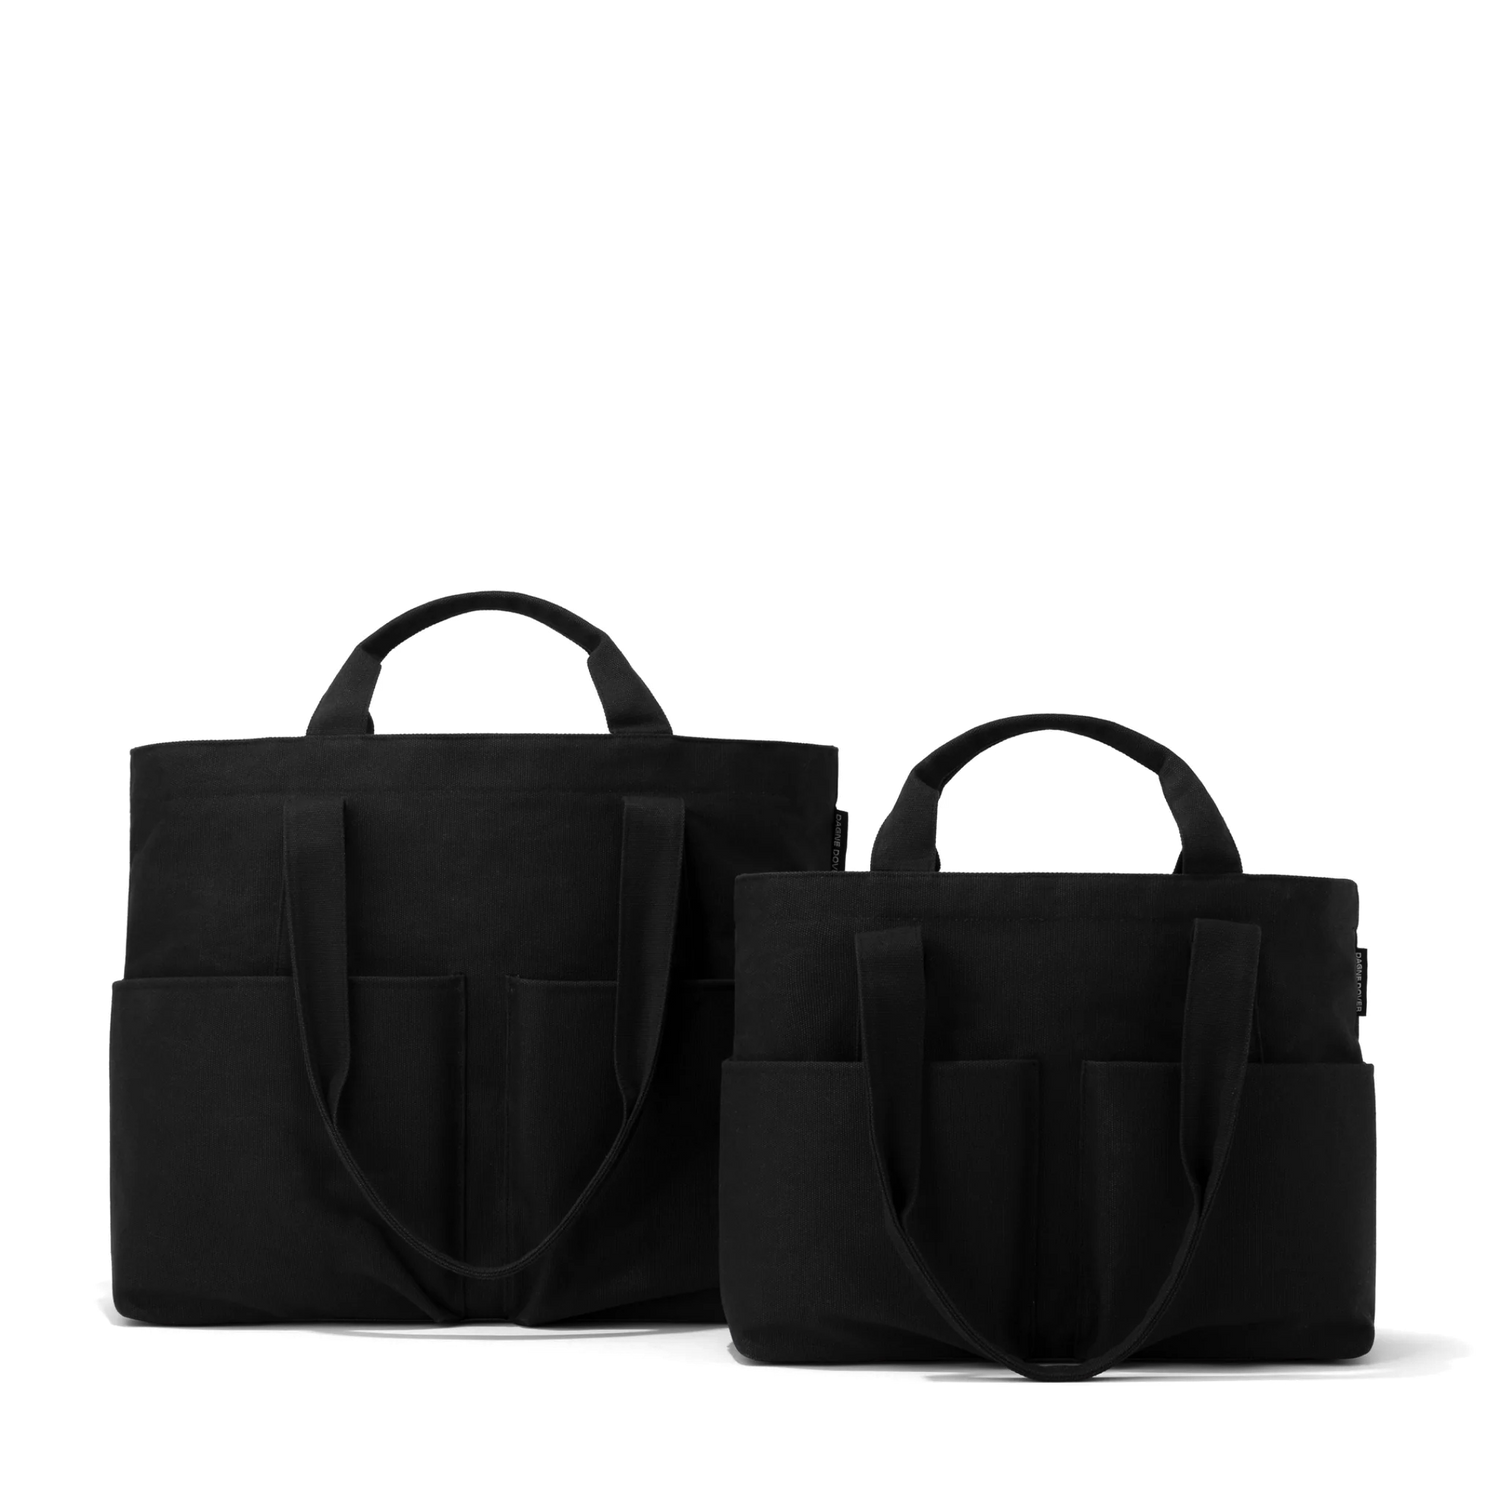 You can't go wrong with a black bag, and Miami went classic this